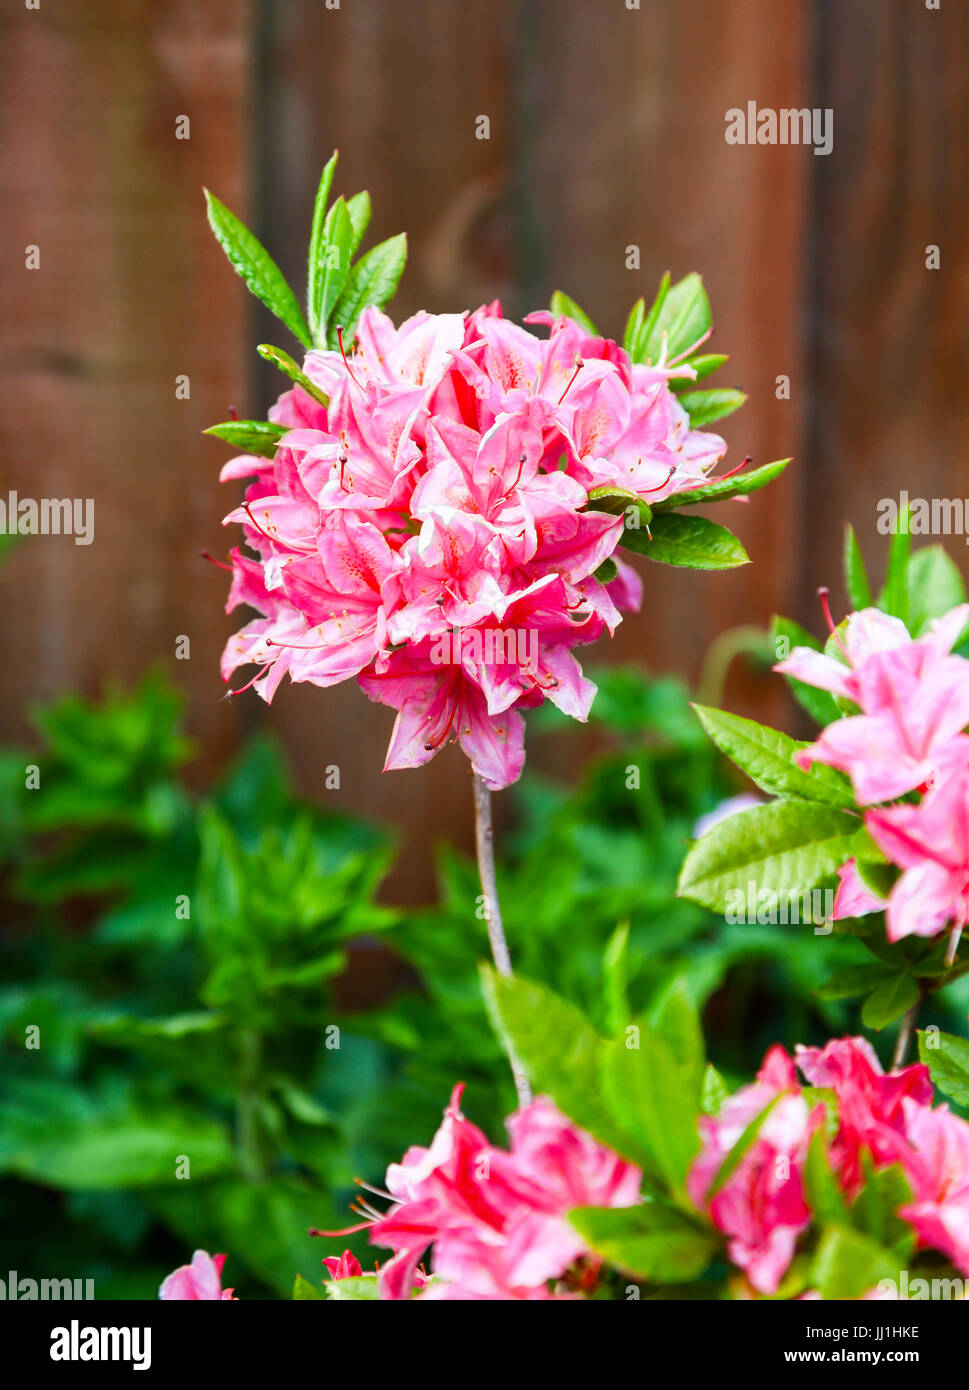 The pink flowers of an Azalea shrub in the genus Rhododendron Stock Photo